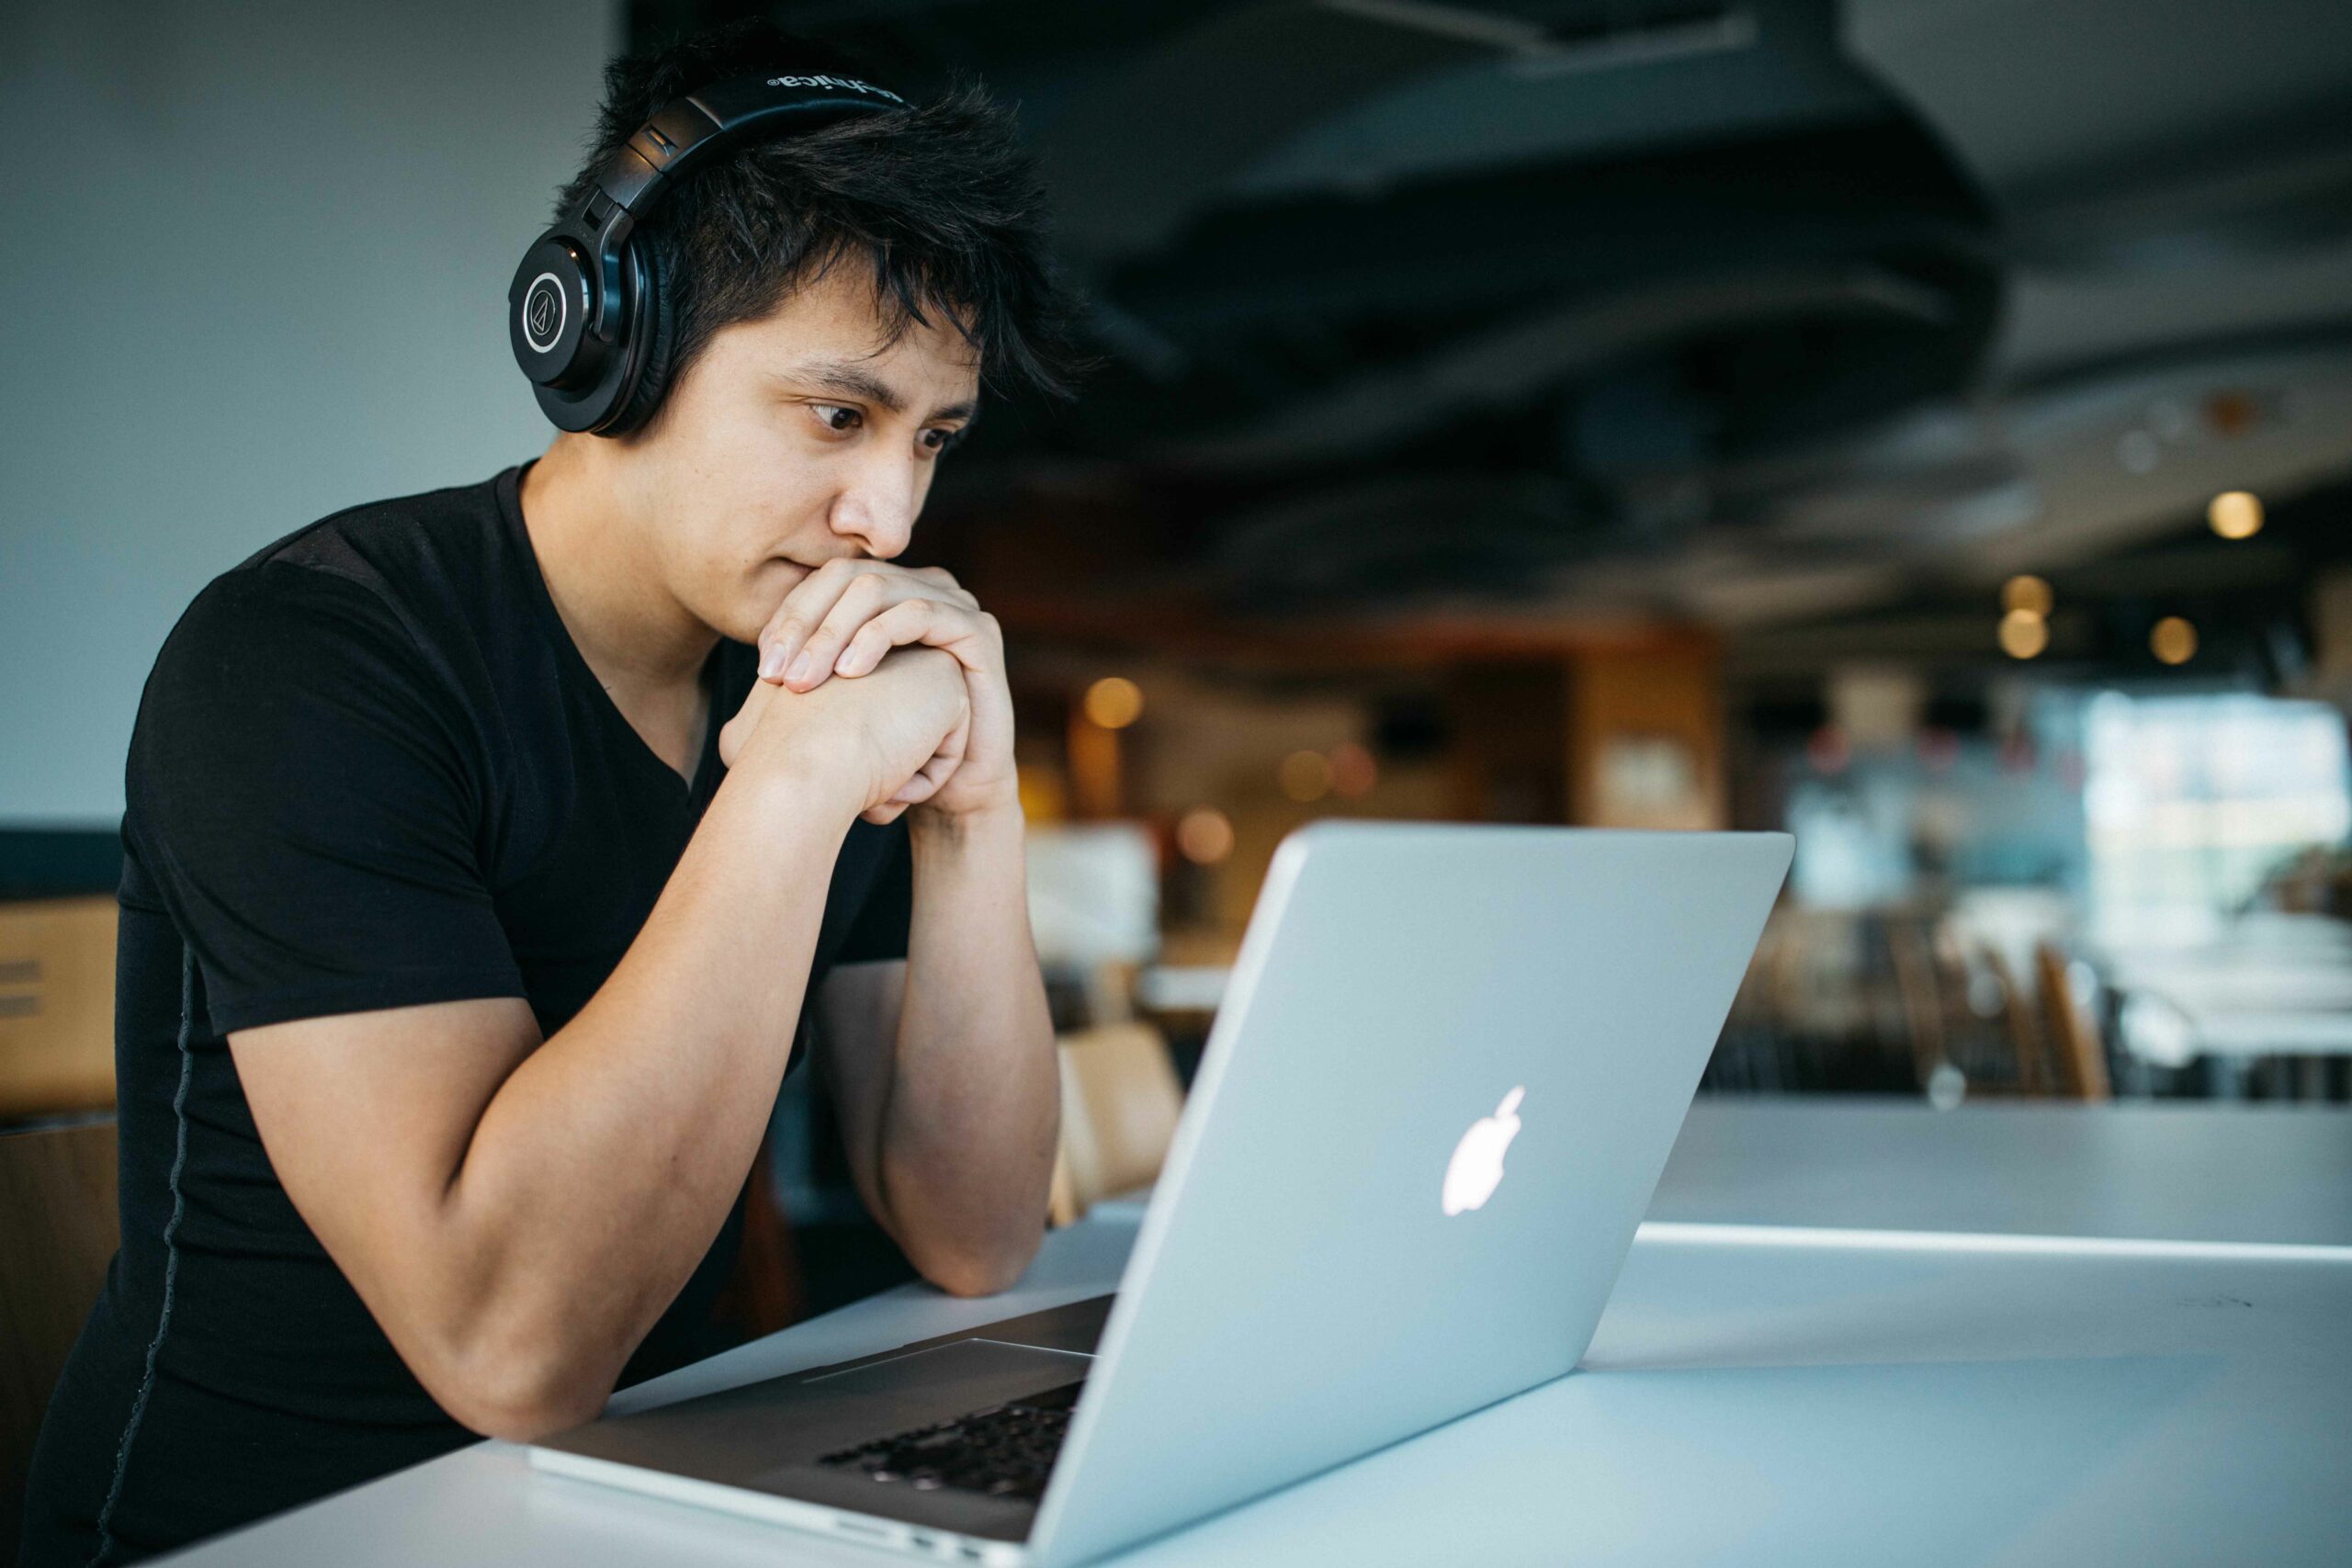 stock image of Asian man with a laptop and headphones